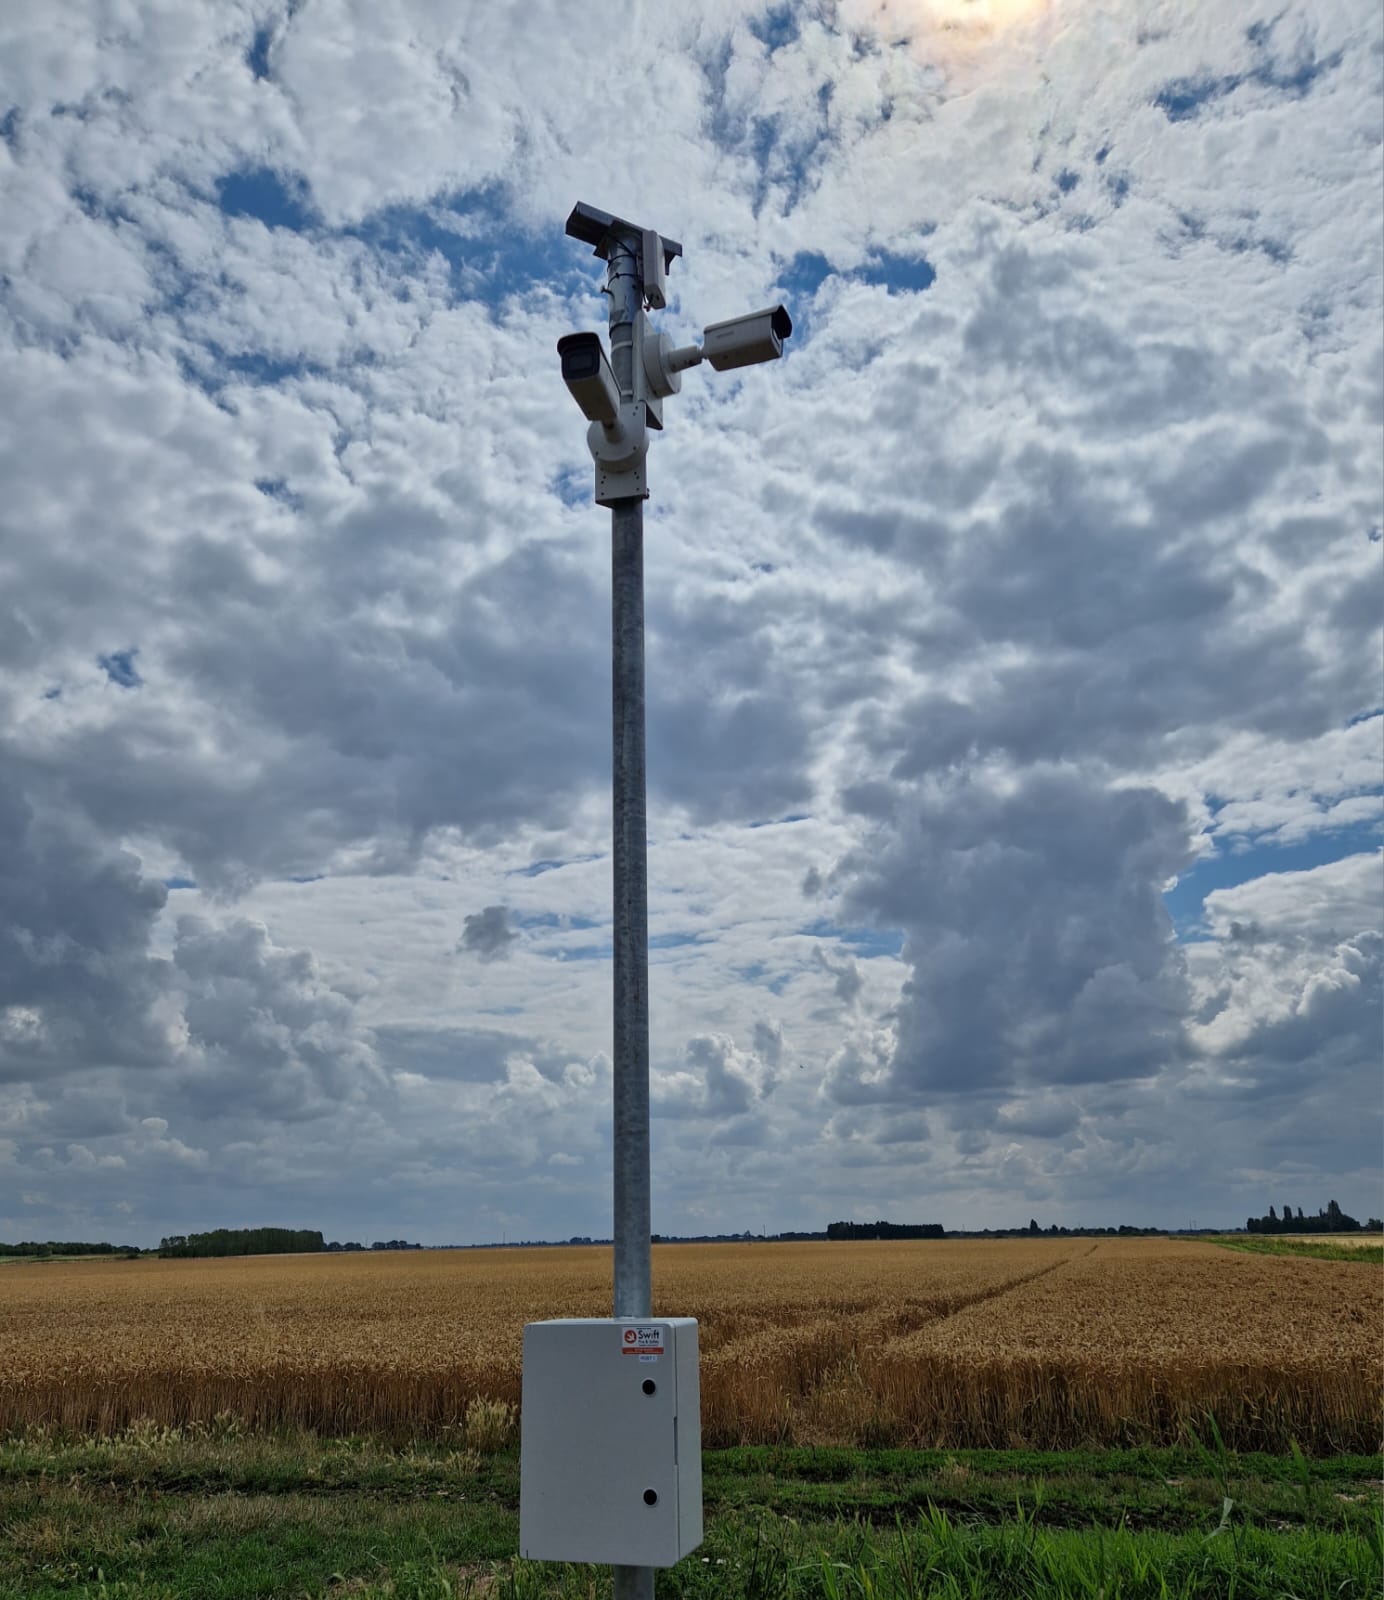 A pole with three CCTV cameras surveying nearby land, just outside a corn field